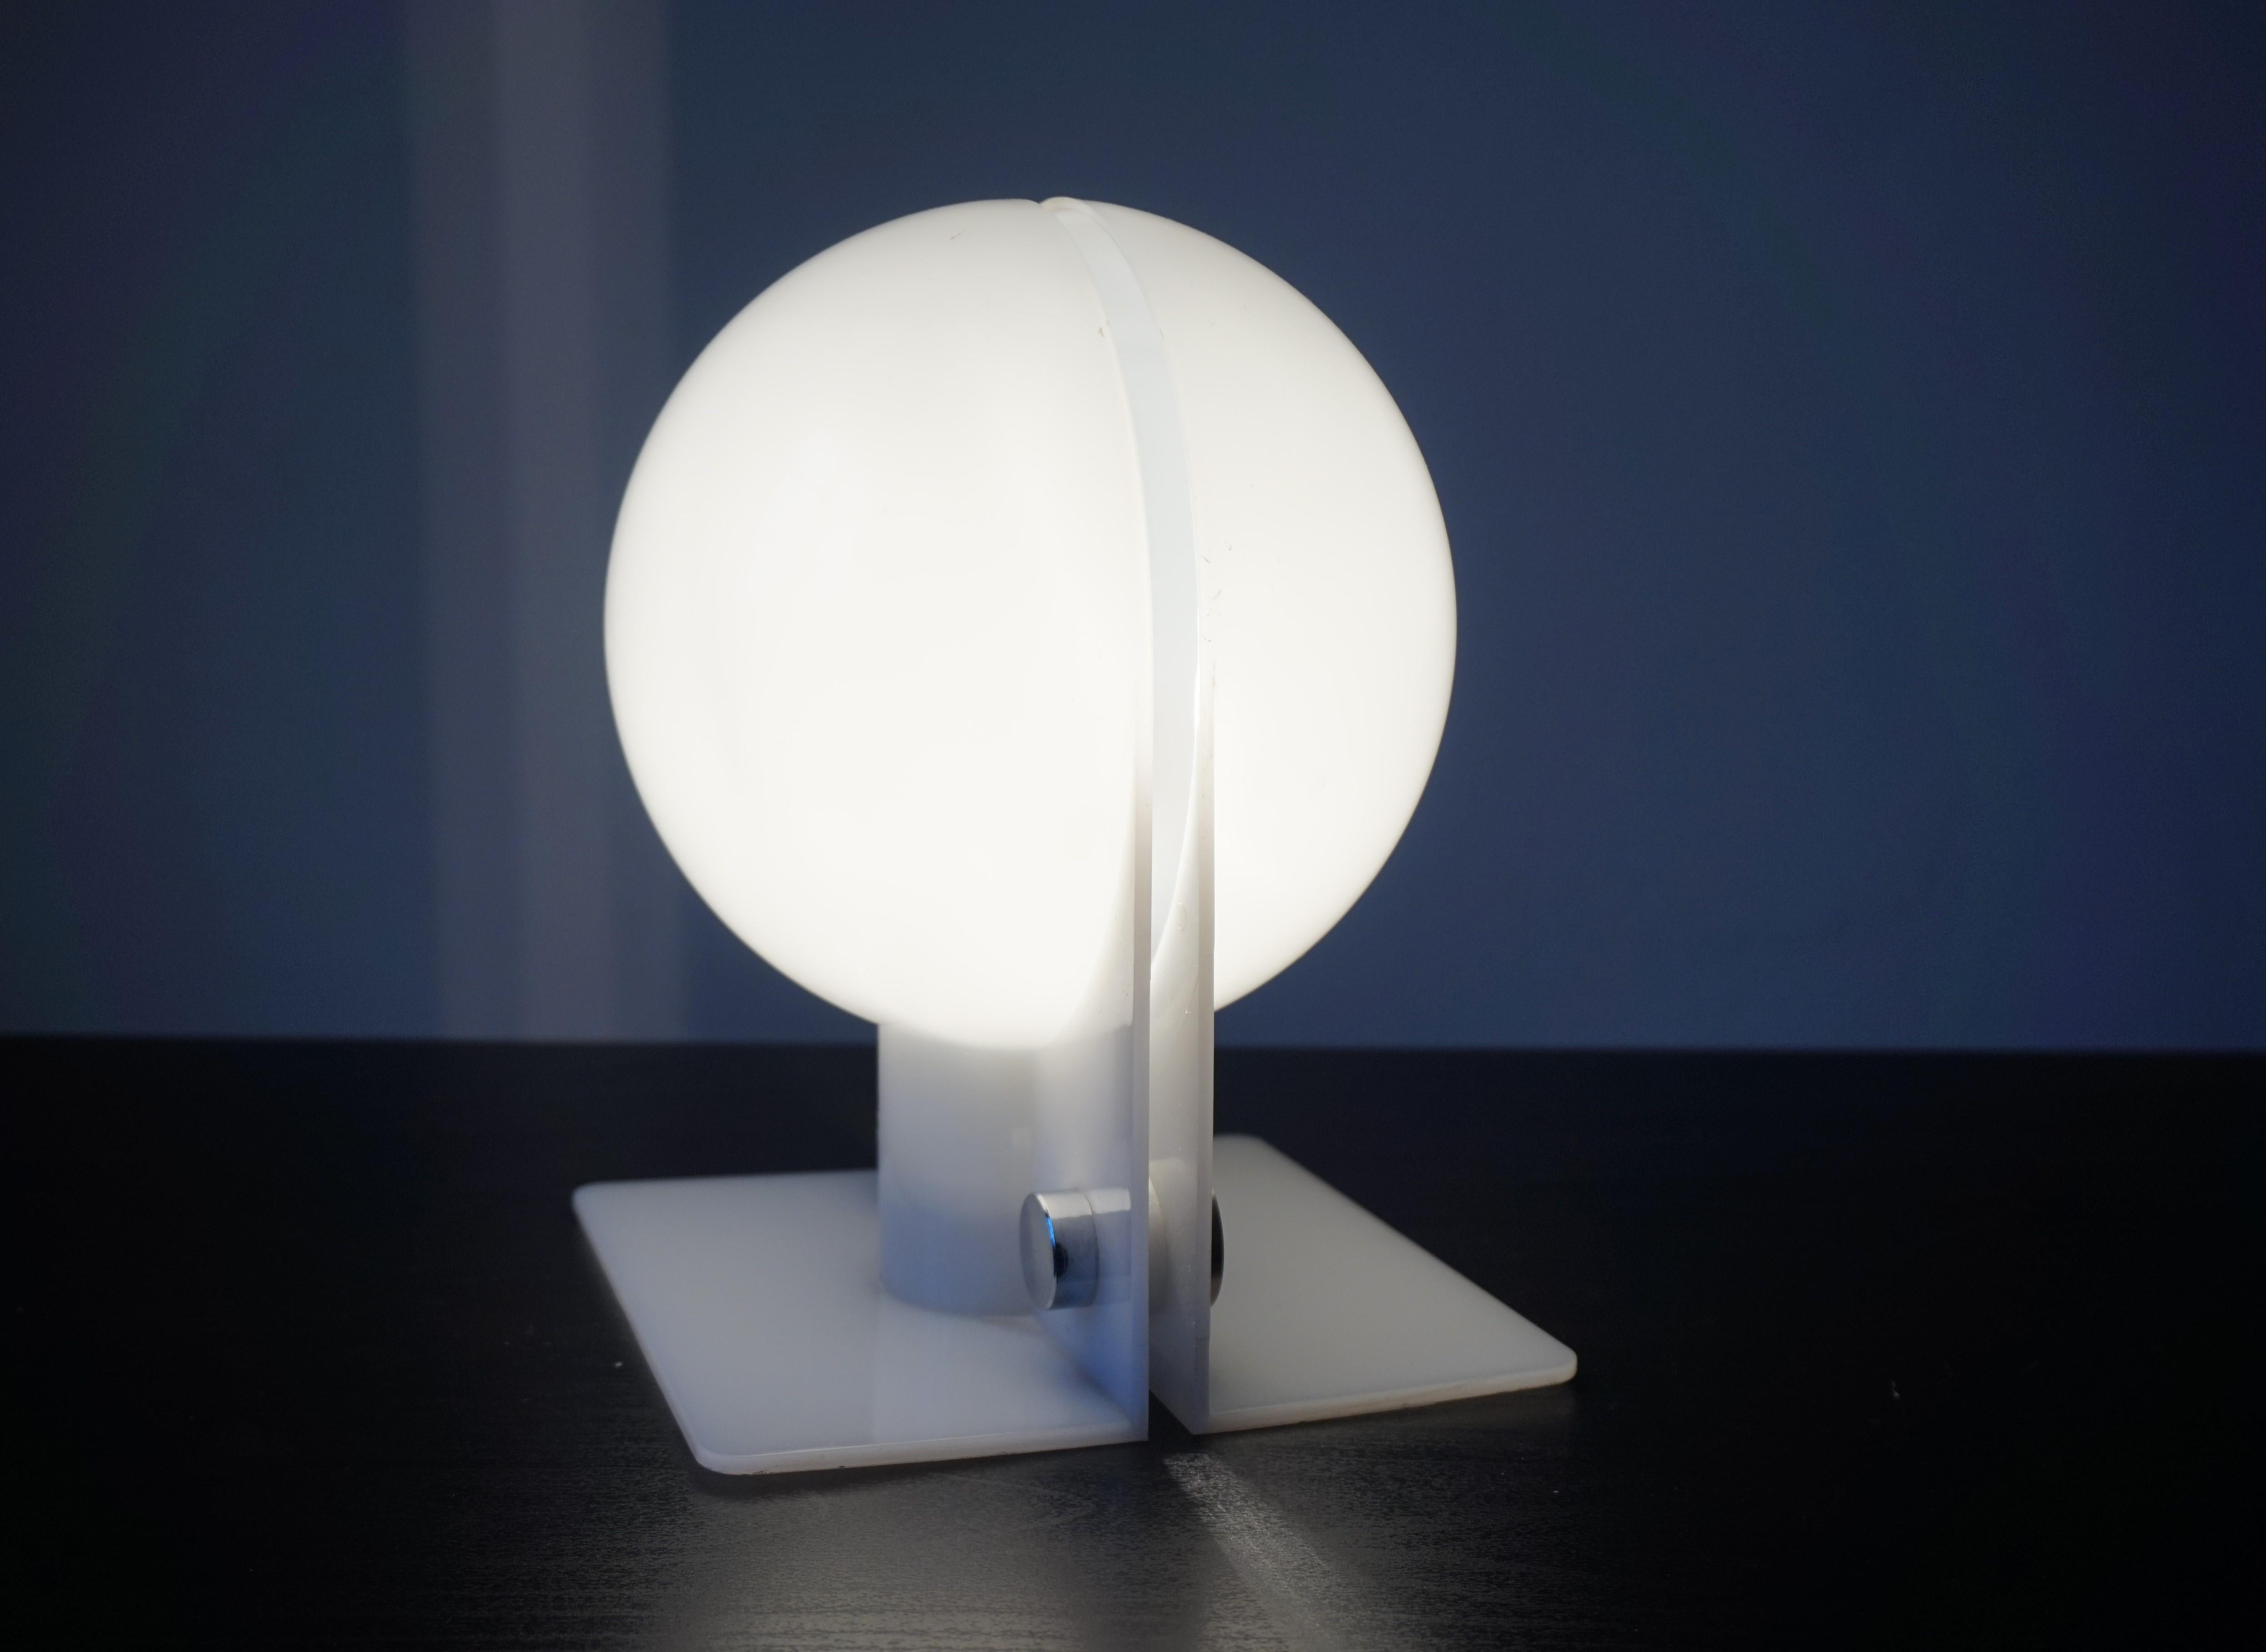 A Sirio table lamp made of white plastic shells in very good condition. The two shells of the lamp are undamaged and are held together with 2 stainless steel screws. By changing a shell it is possible to create different lighting effects or to give